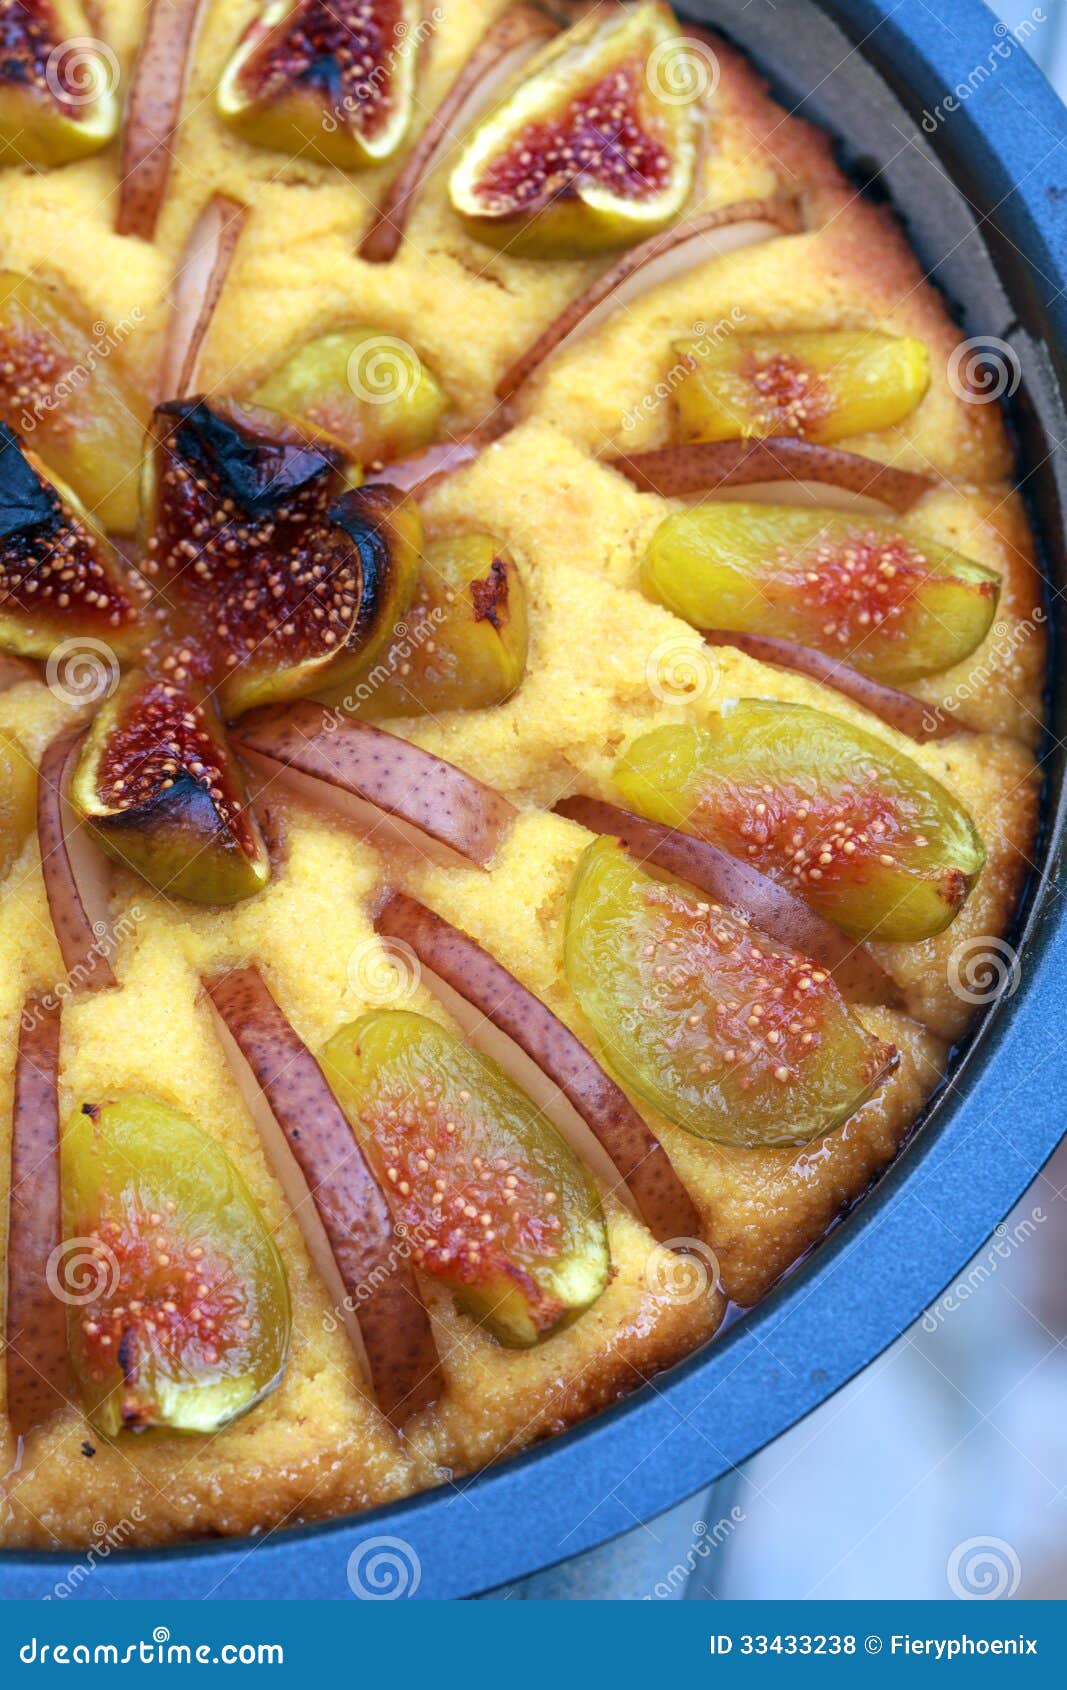 part of tart with caramelised figs and pears with corn meal close-up